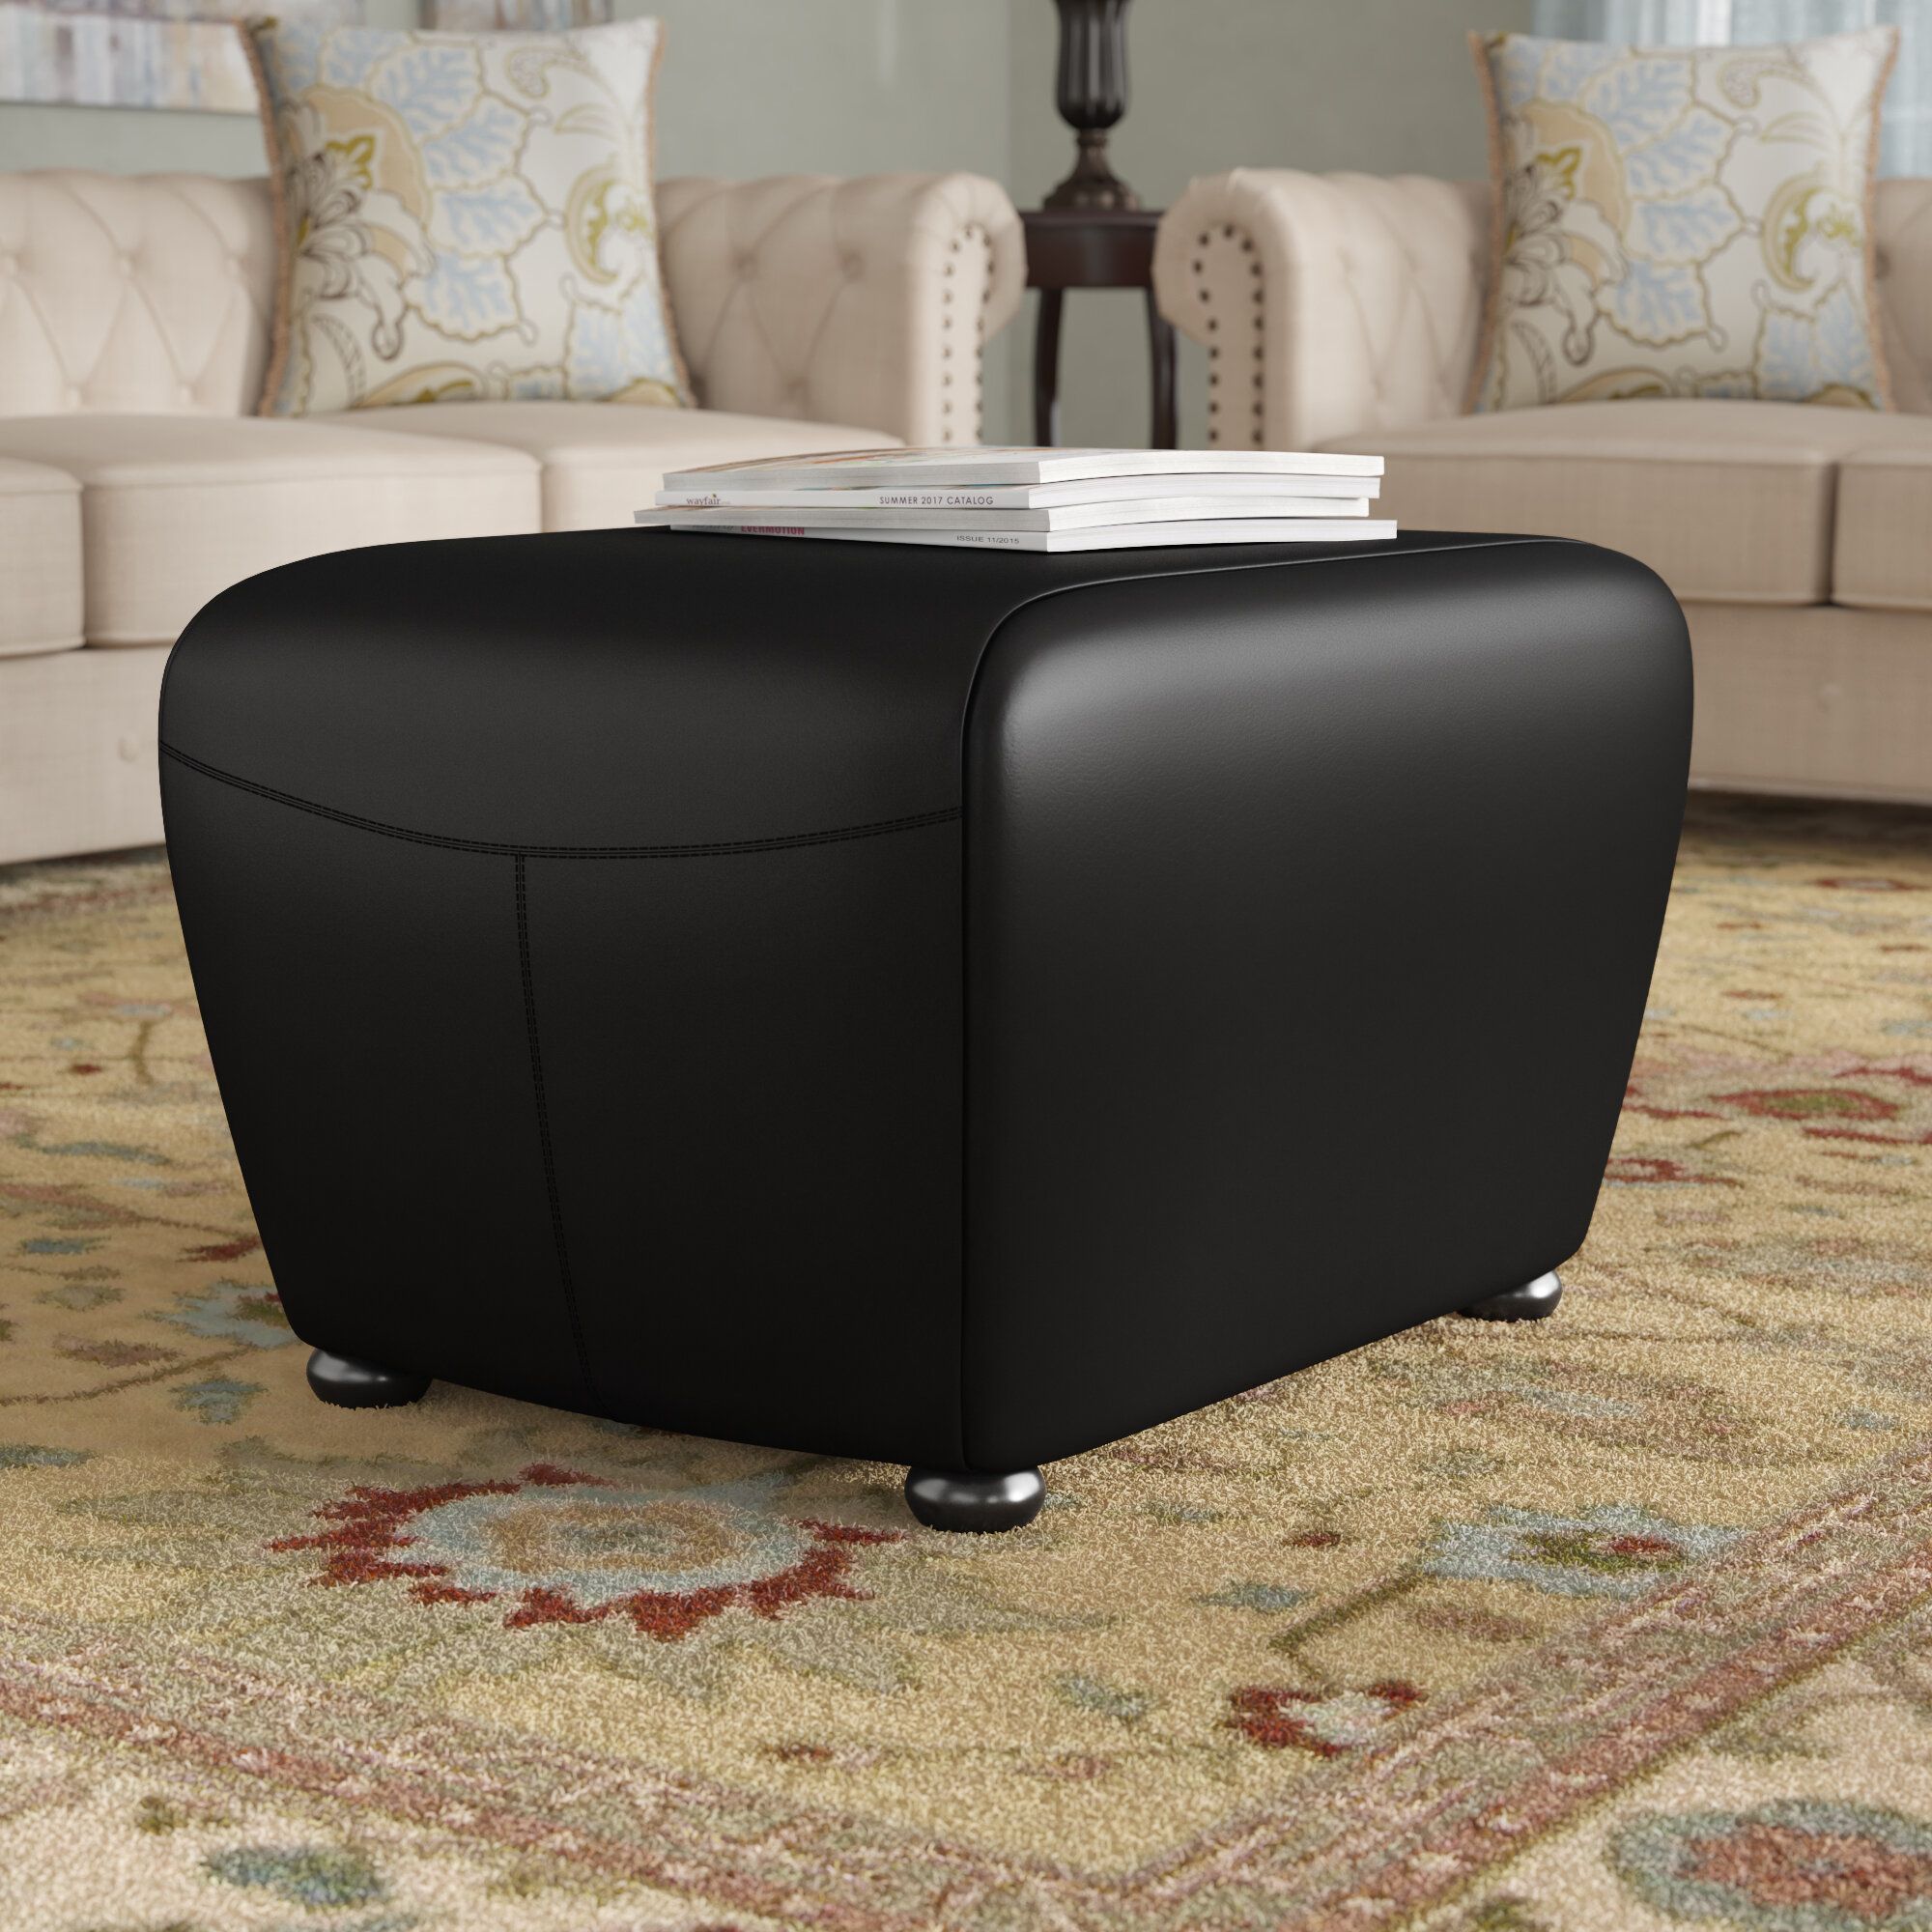 Darby Home Co Madeleine Vegan Leather Ottoman & Reviews – Wayfair Canada Throughout Black Leather Wrapped Ottomans (View 11 of 15)